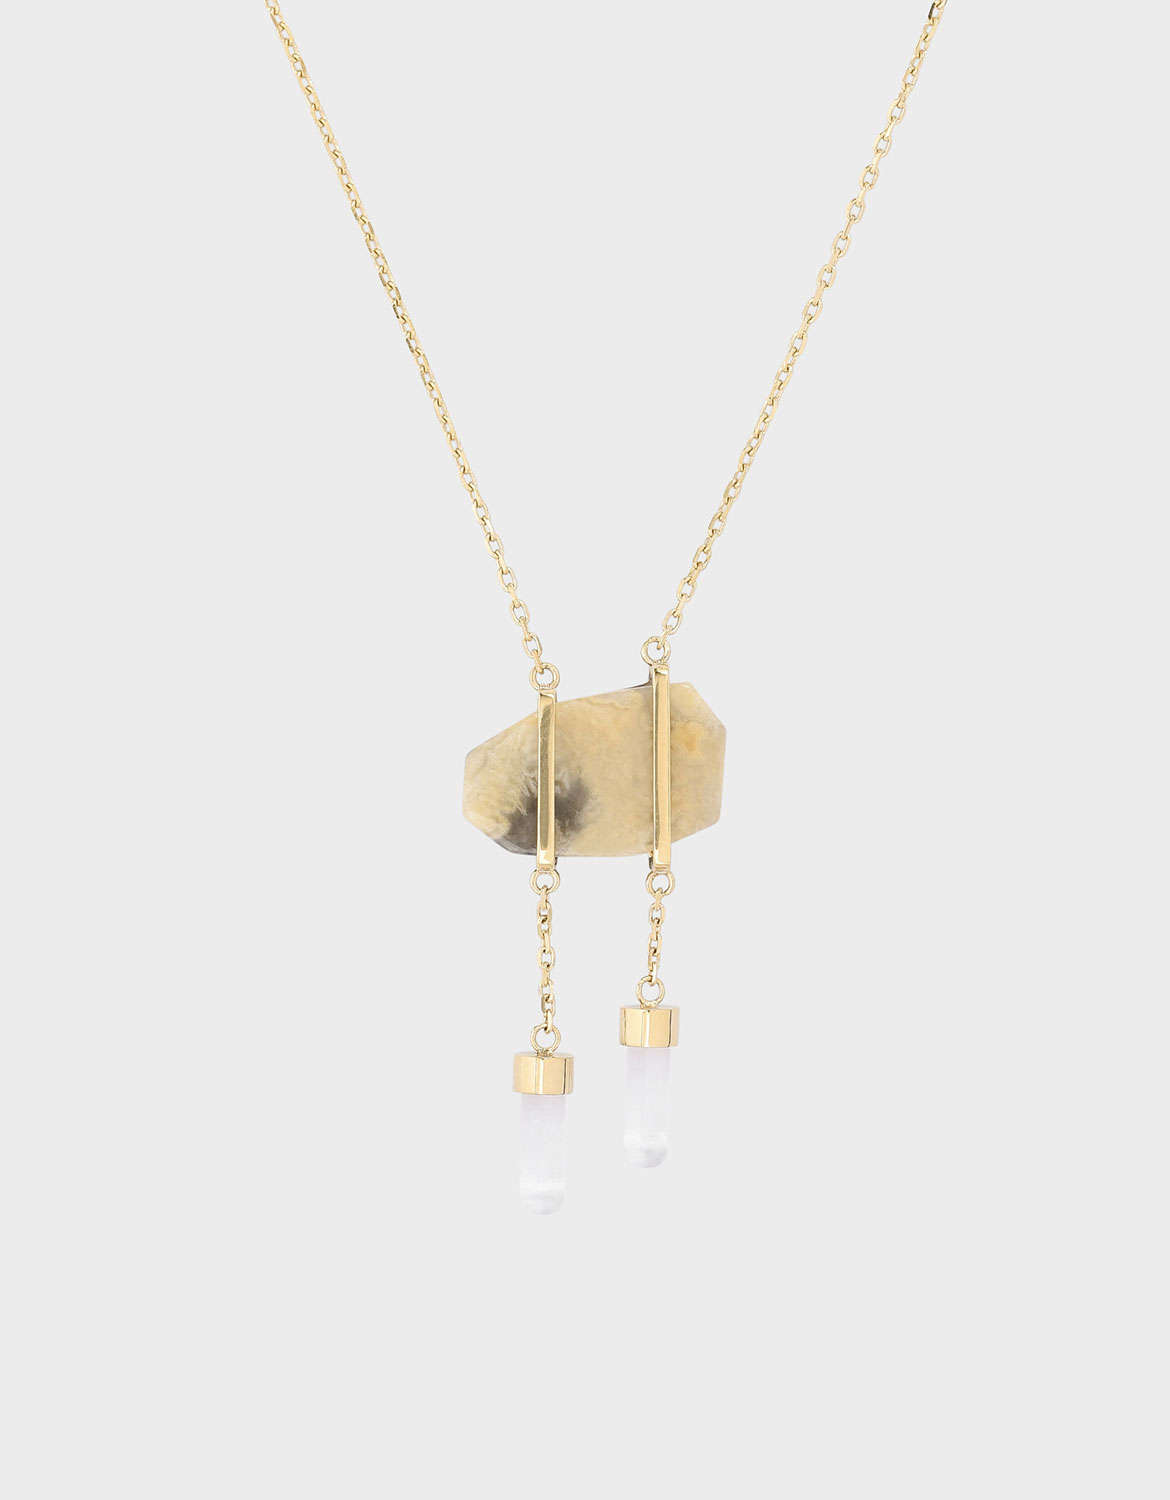 Women’s gold Crazy Agate stone necklace